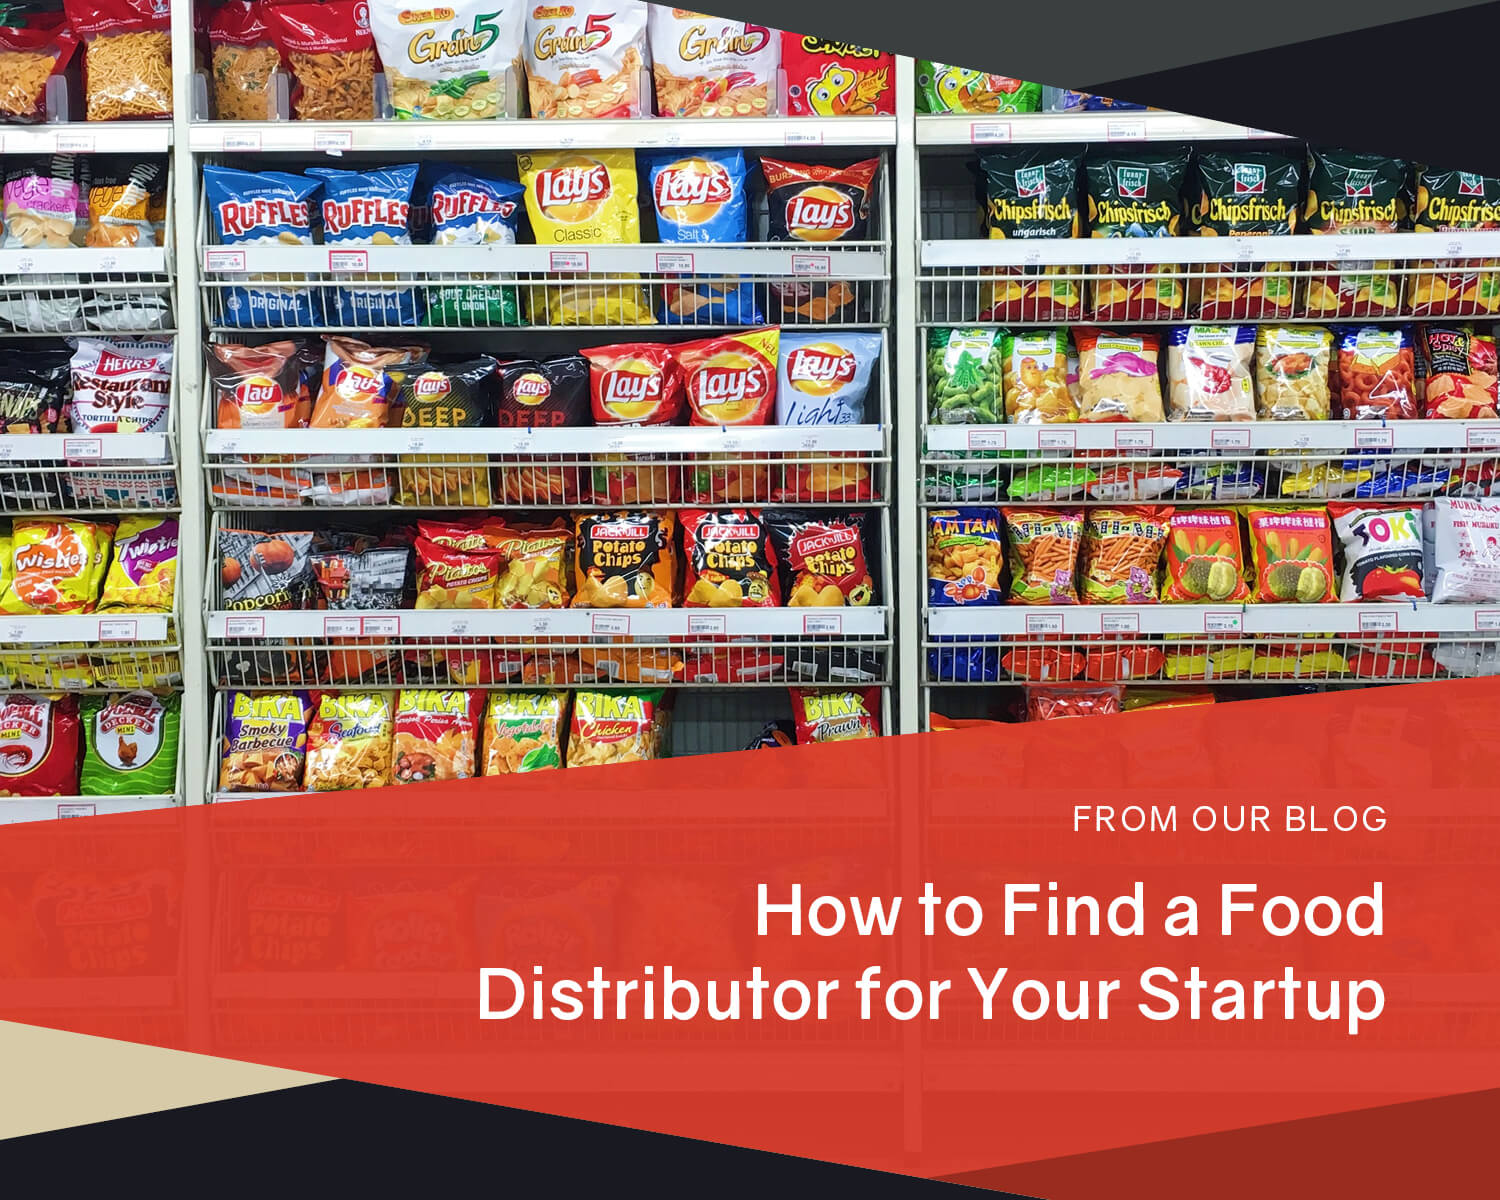 How to Find a Food Distributor for Your Startup